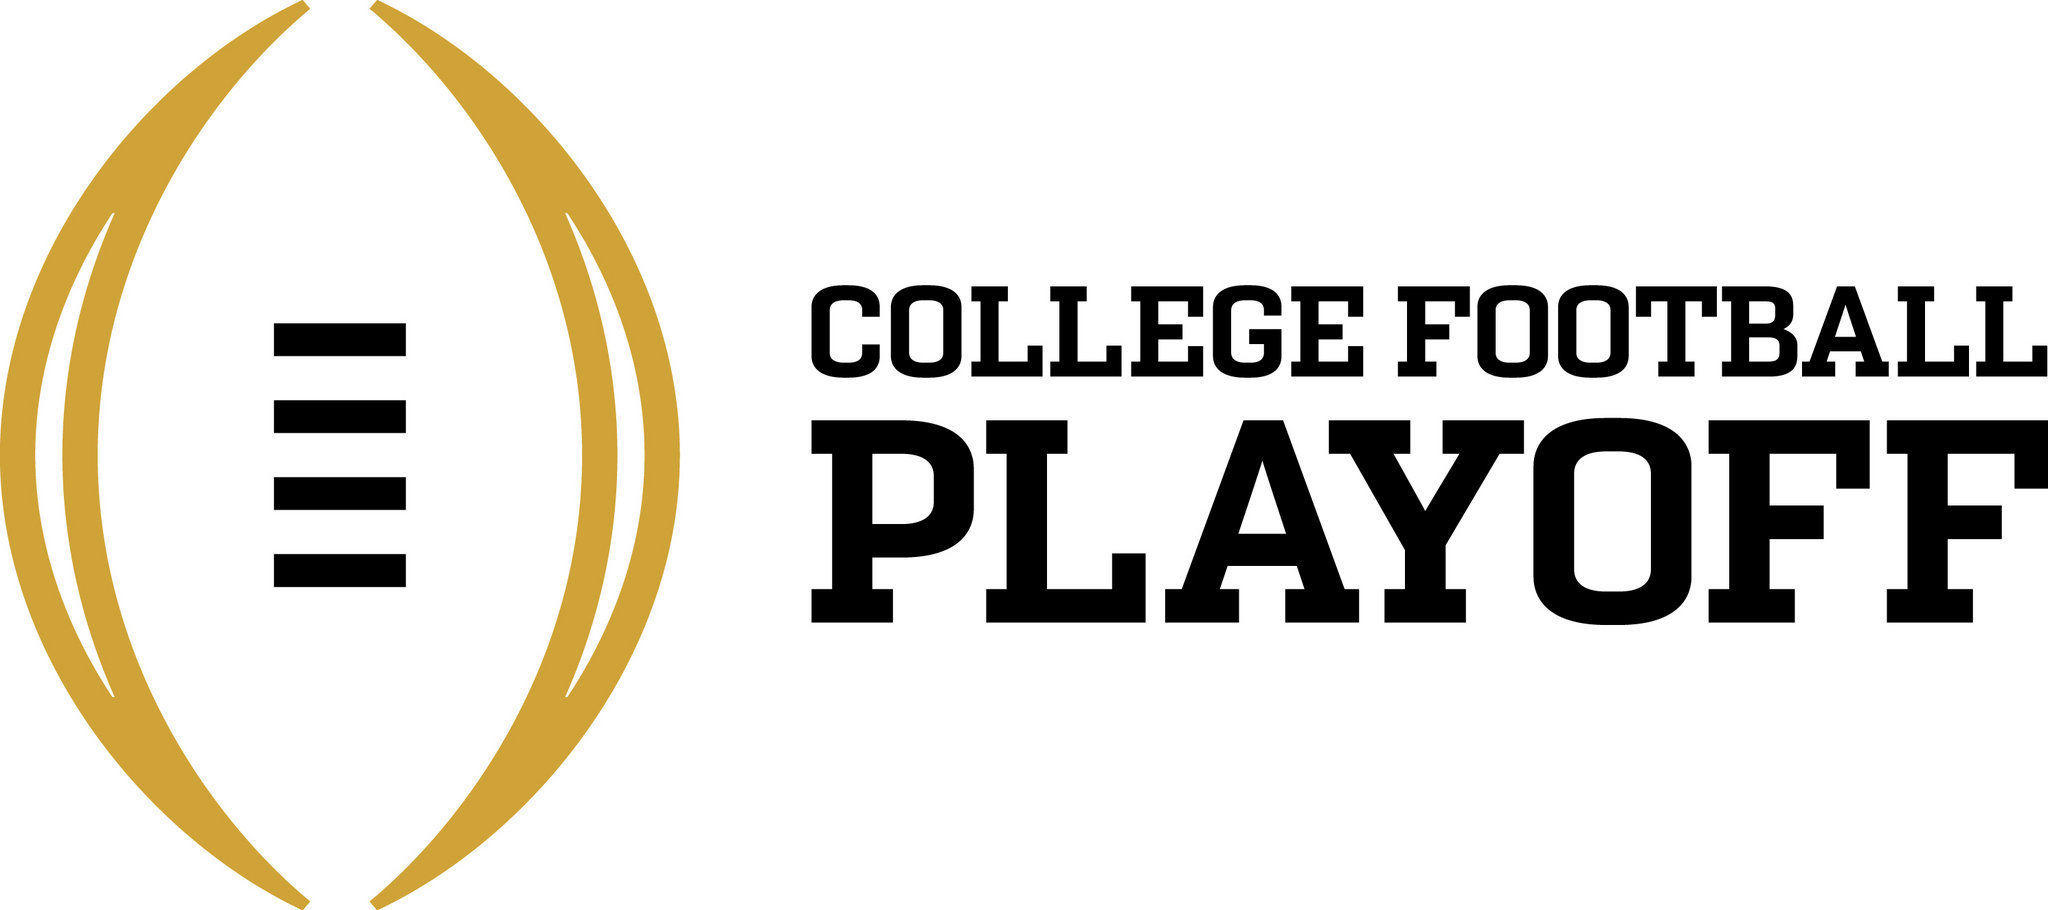 2020 College Football Playoff Odds & Predictions - 4 Teams to Make Playoff